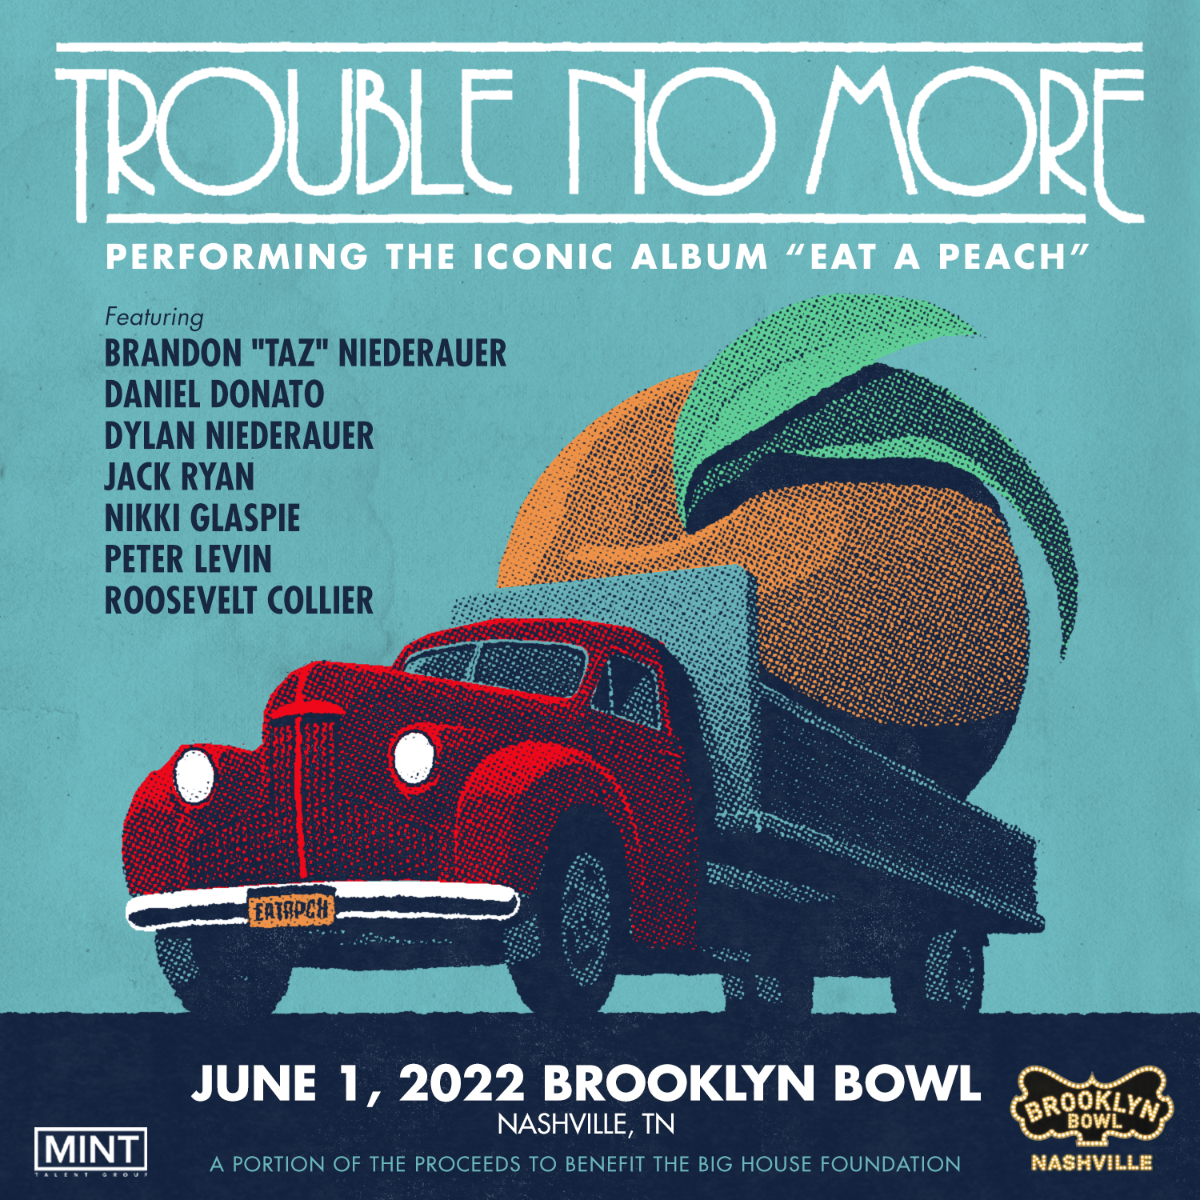 Trouble No More - Performing The Iconic Album "Eat A Peach" ft. Brandon "Taz" Niederauer, Daniel Donato, Dylan Niederauer, Jack Ryan, Nikki Glaspie, Peter Levin and Roosevelt Collier